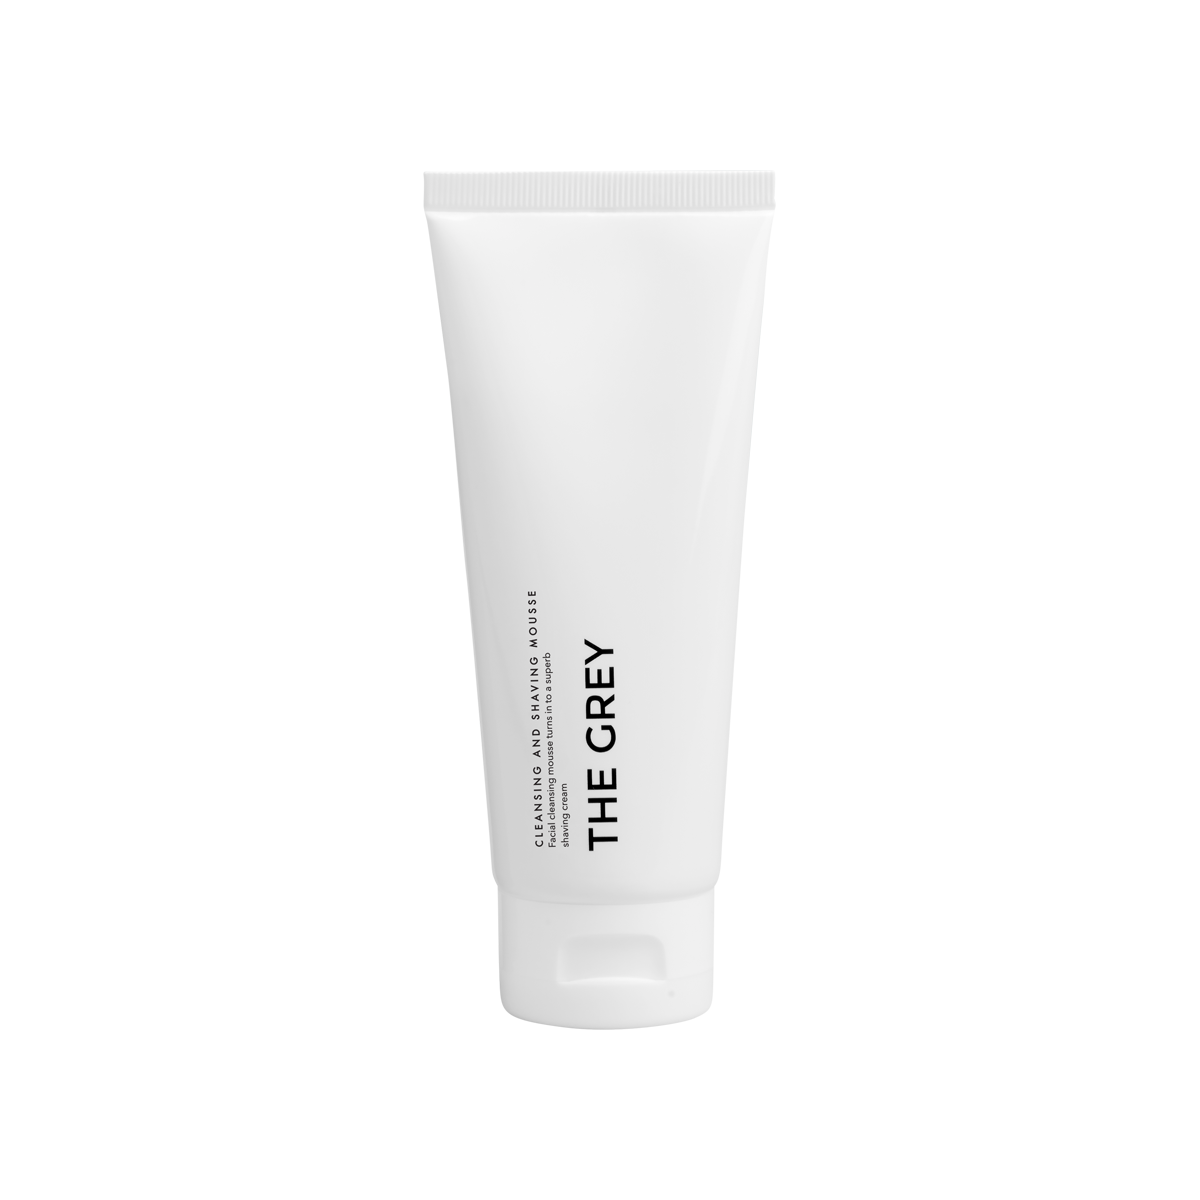 The Grey Skincare - Cleansing and Shaving Mousse